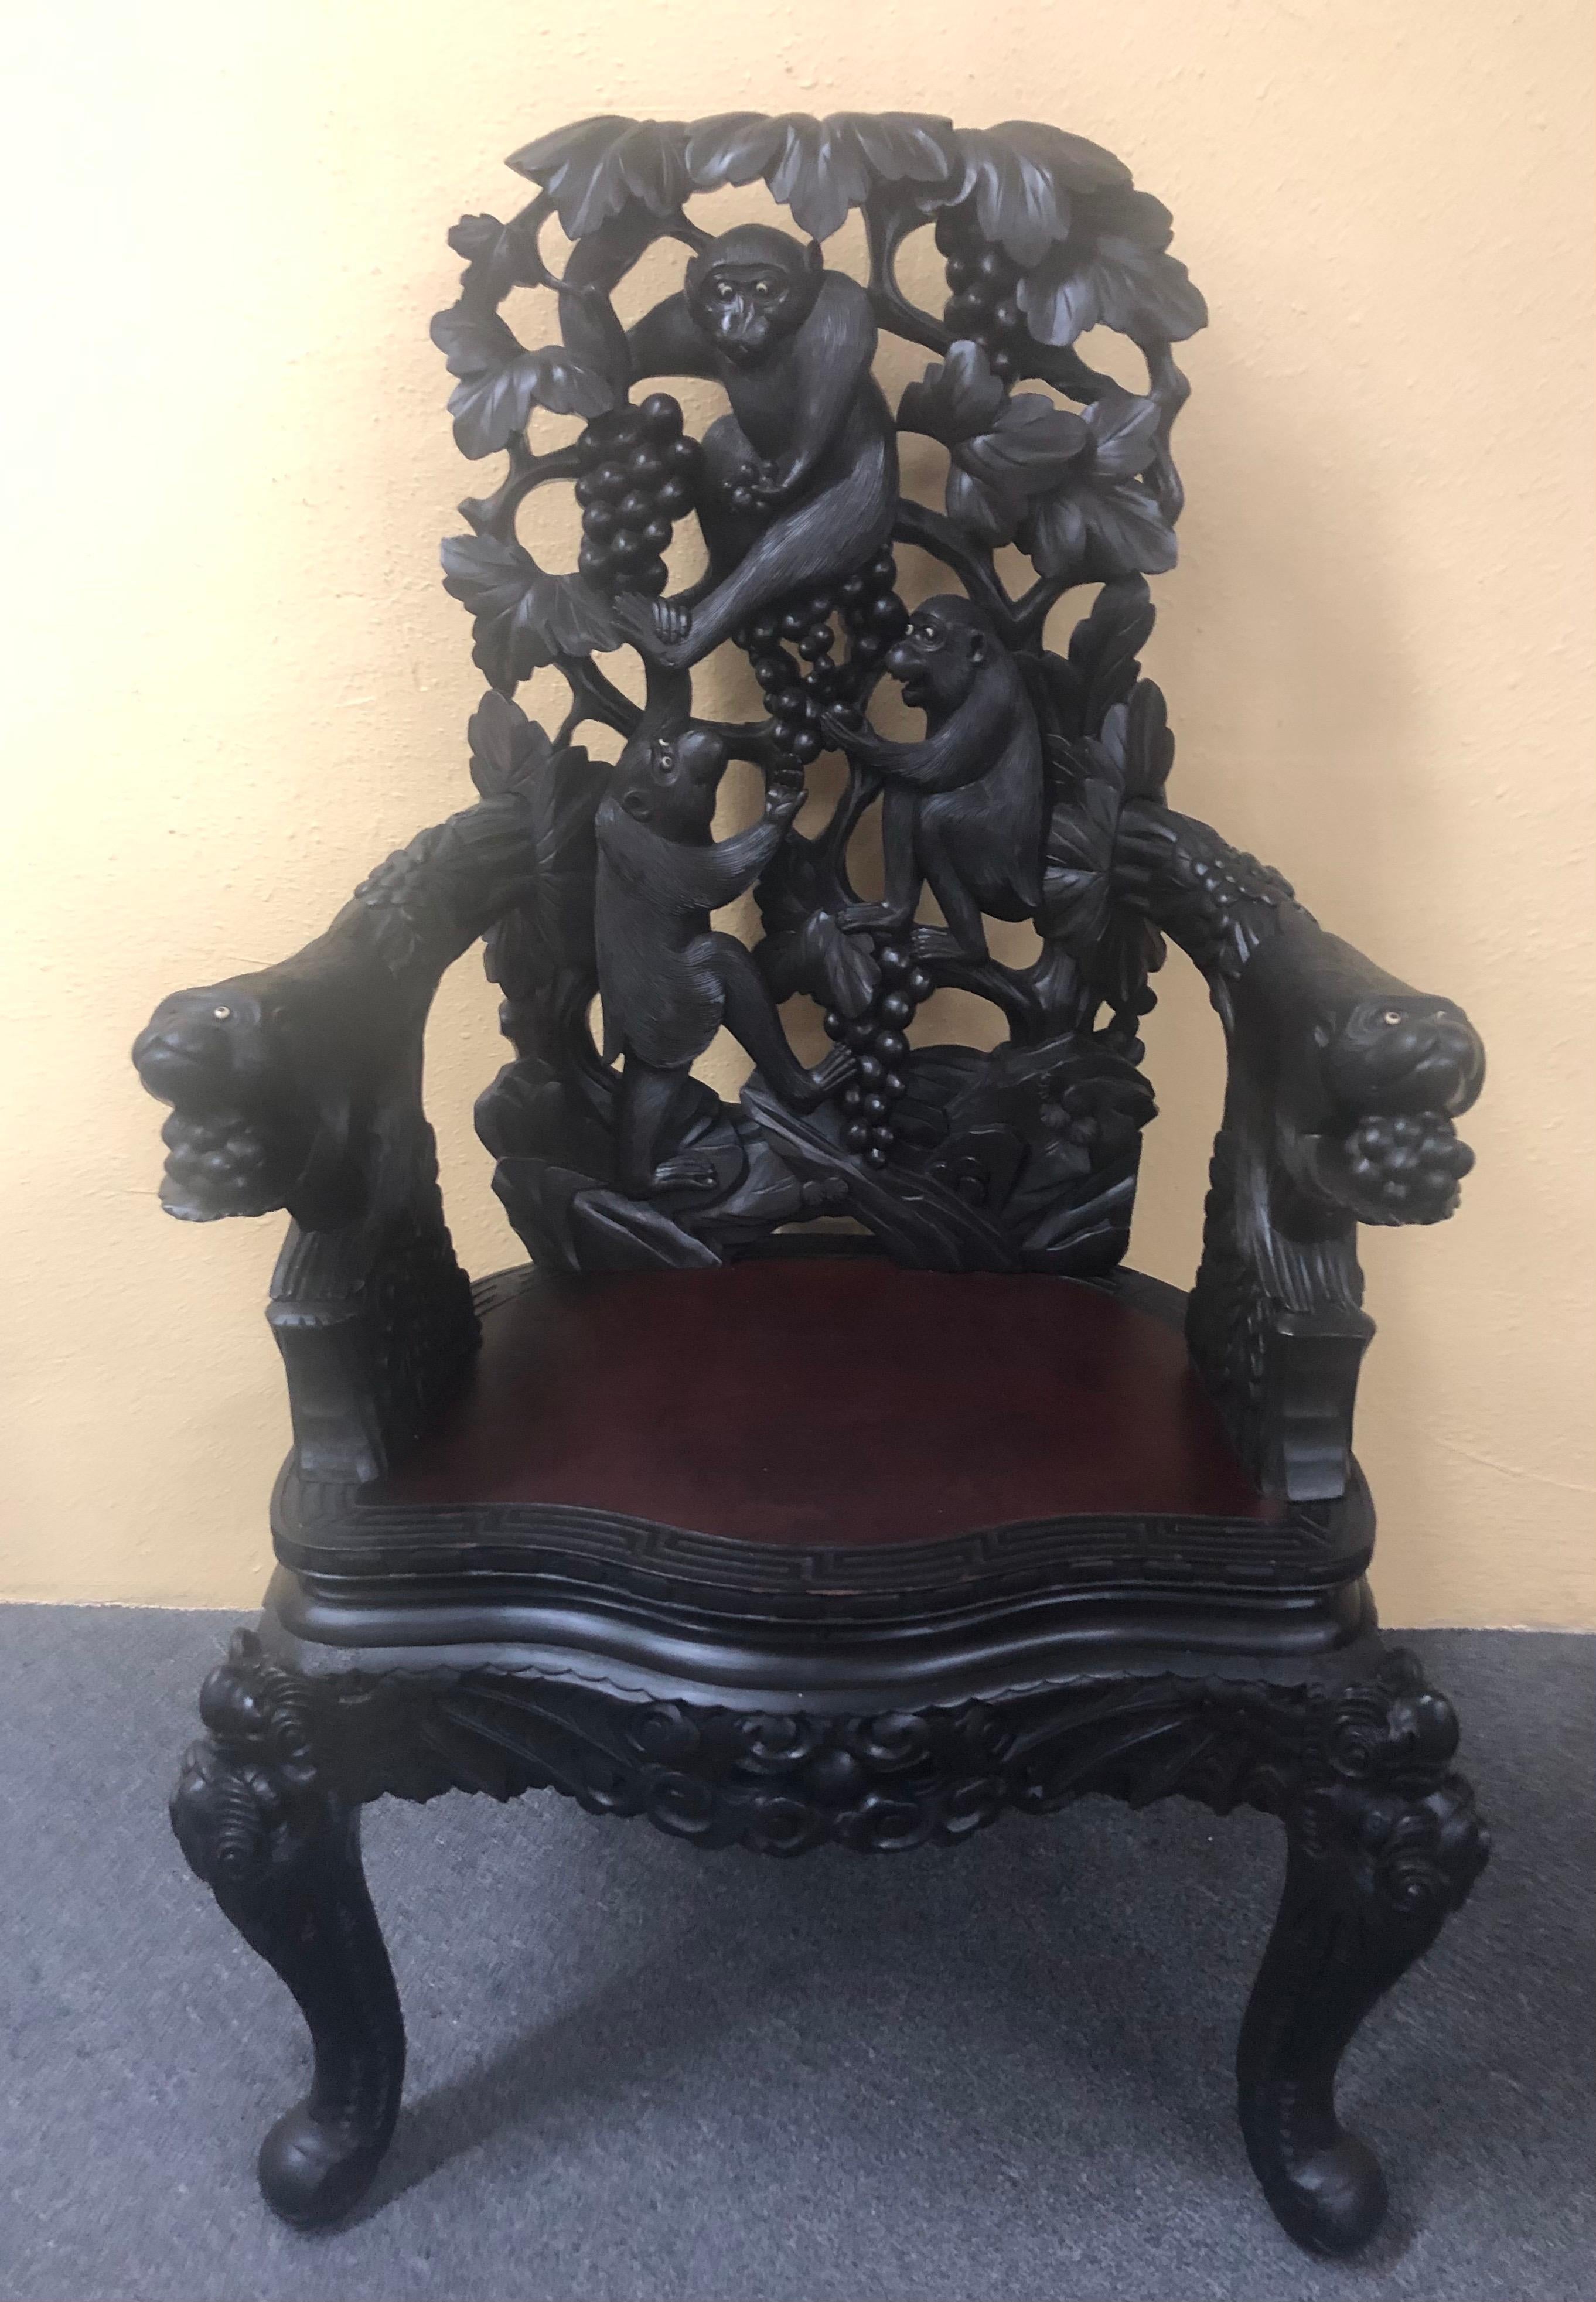 Japanese hand carved dark wood export monkey armchair, circa 1940s. This antique Japanese armchair is intricately carved with the chair back depicting tree branches with monkeys. The chair has exceptional detail with monkey heads as arms with inlaid